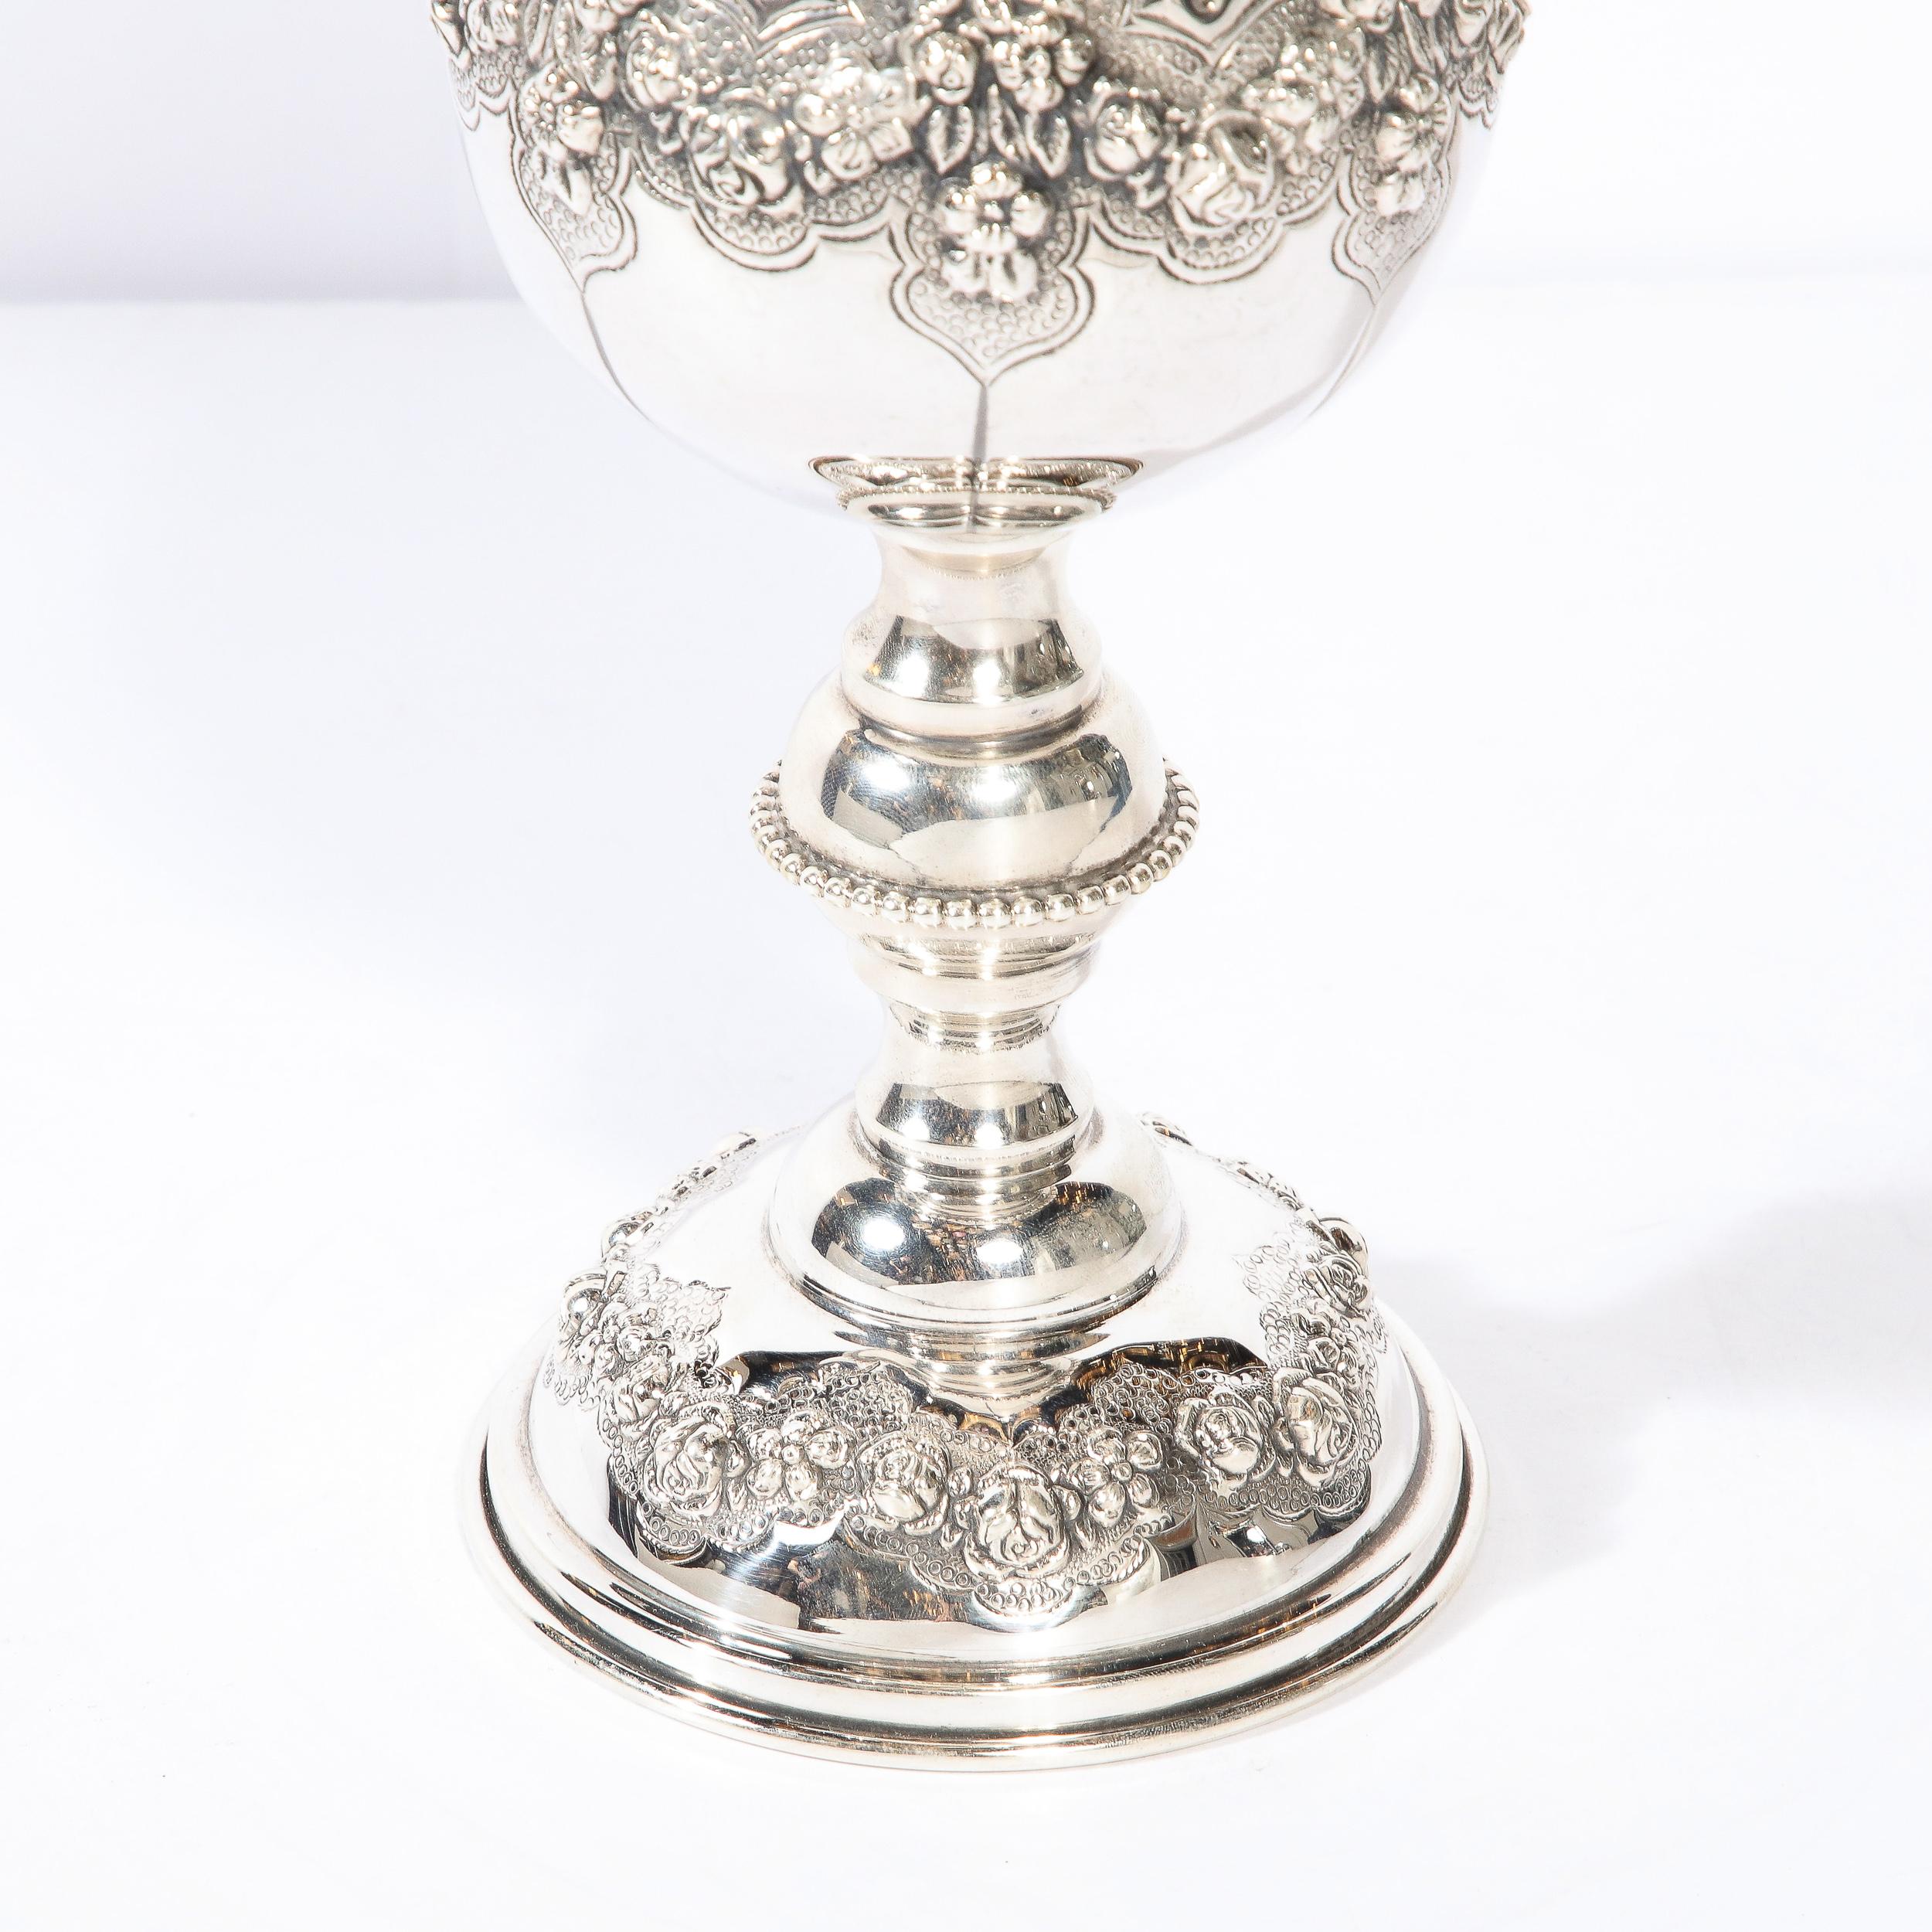 American Monumental Sterling  Kiddish Goblet with Repousse Designs  by Hadad Brothers For Sale